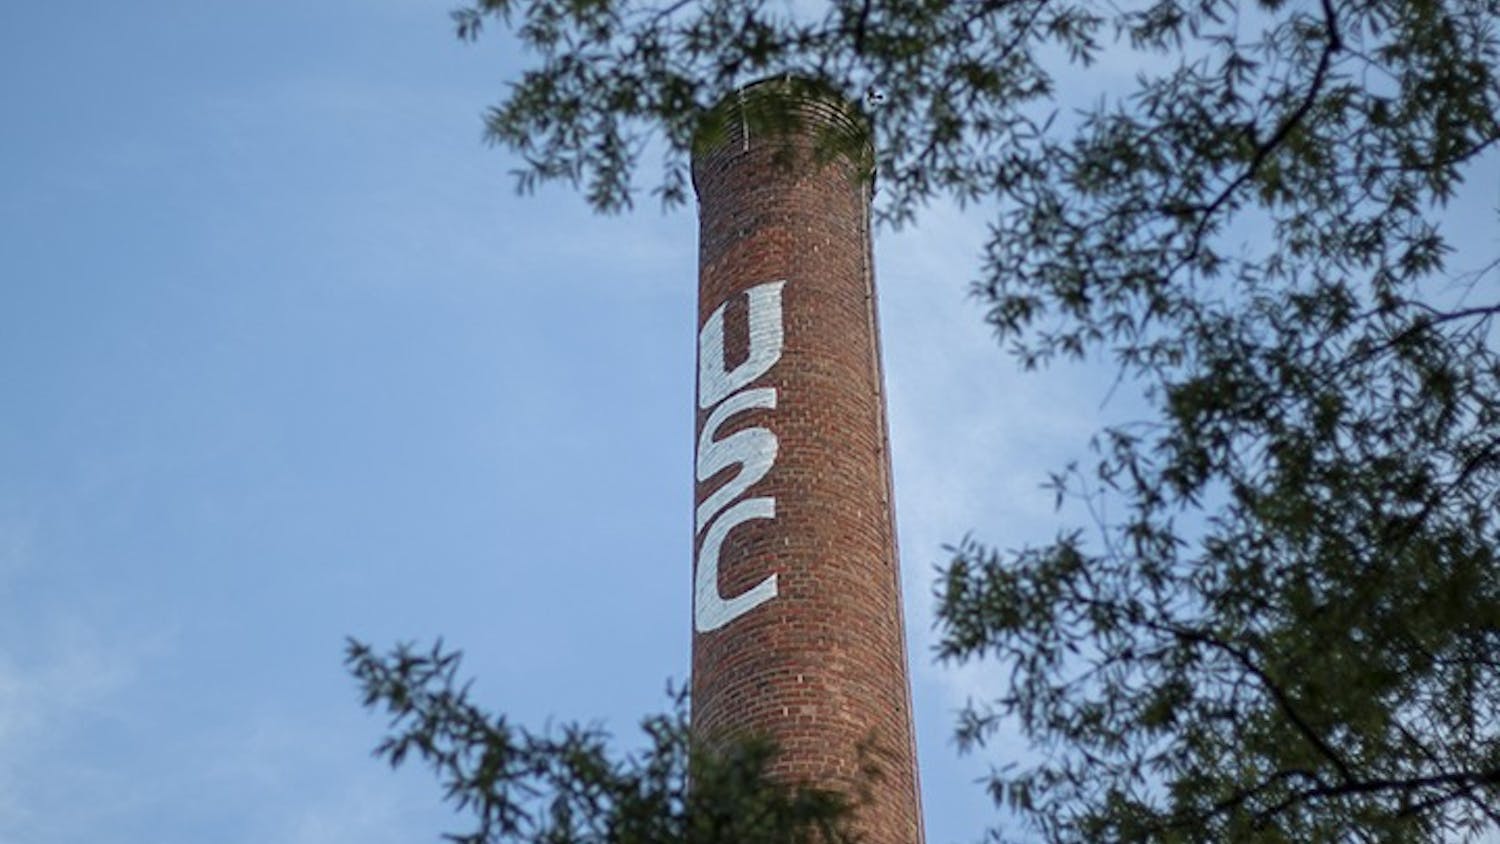 The USC smokestack located next to the Horseshoe is a notable landmark on the university’s campus.